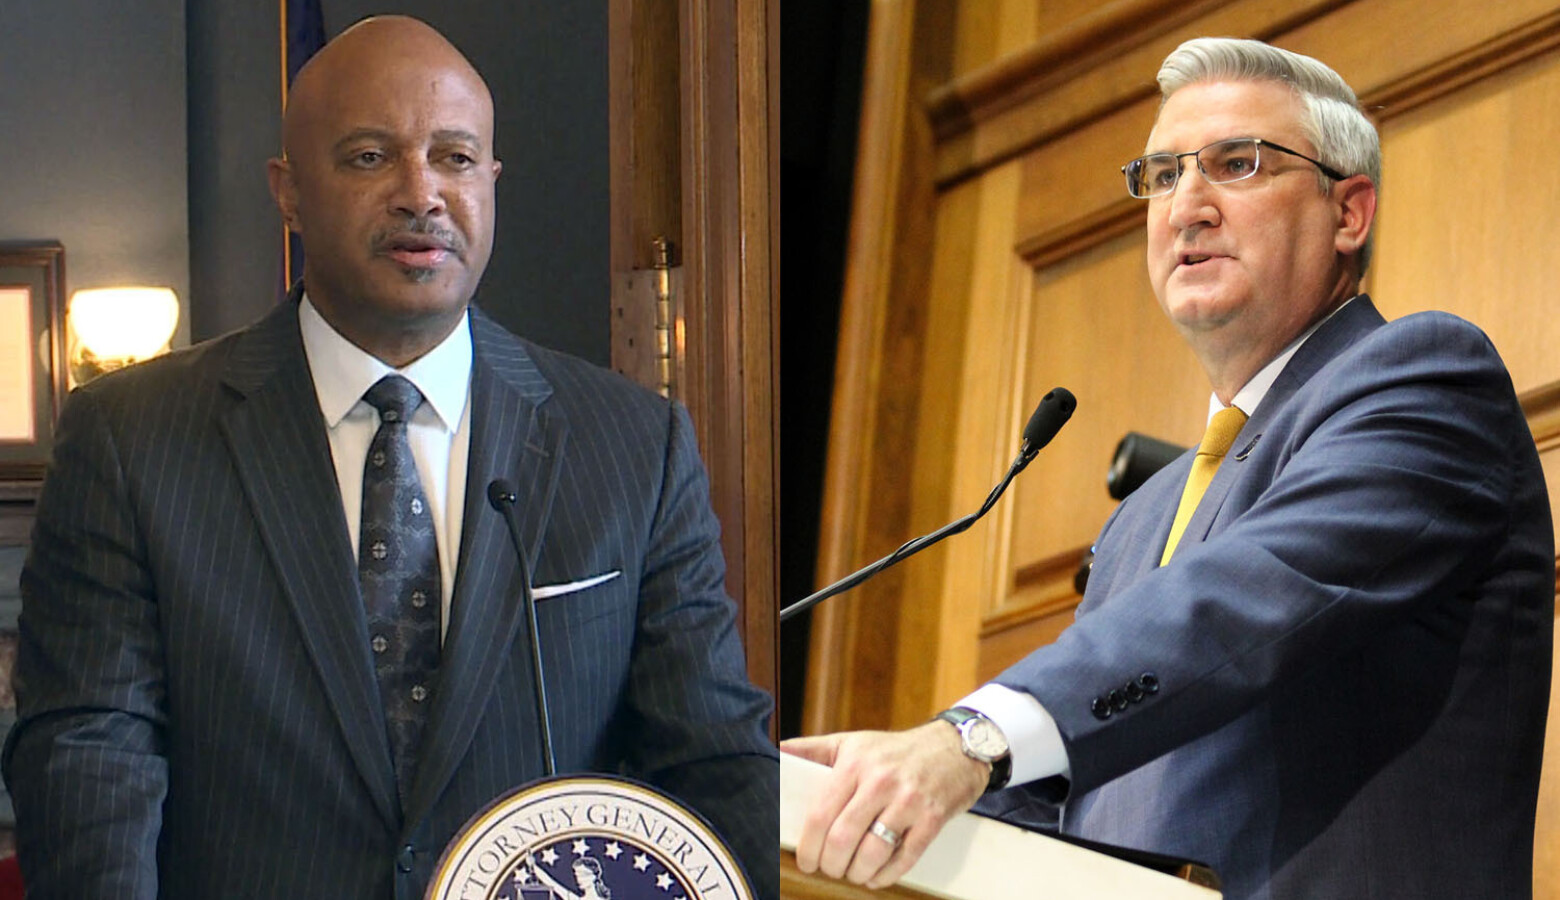 Attorney General Curtis Hill, left, and Gov. Eric Holcomb. (Lauren Chapman/IPB News)